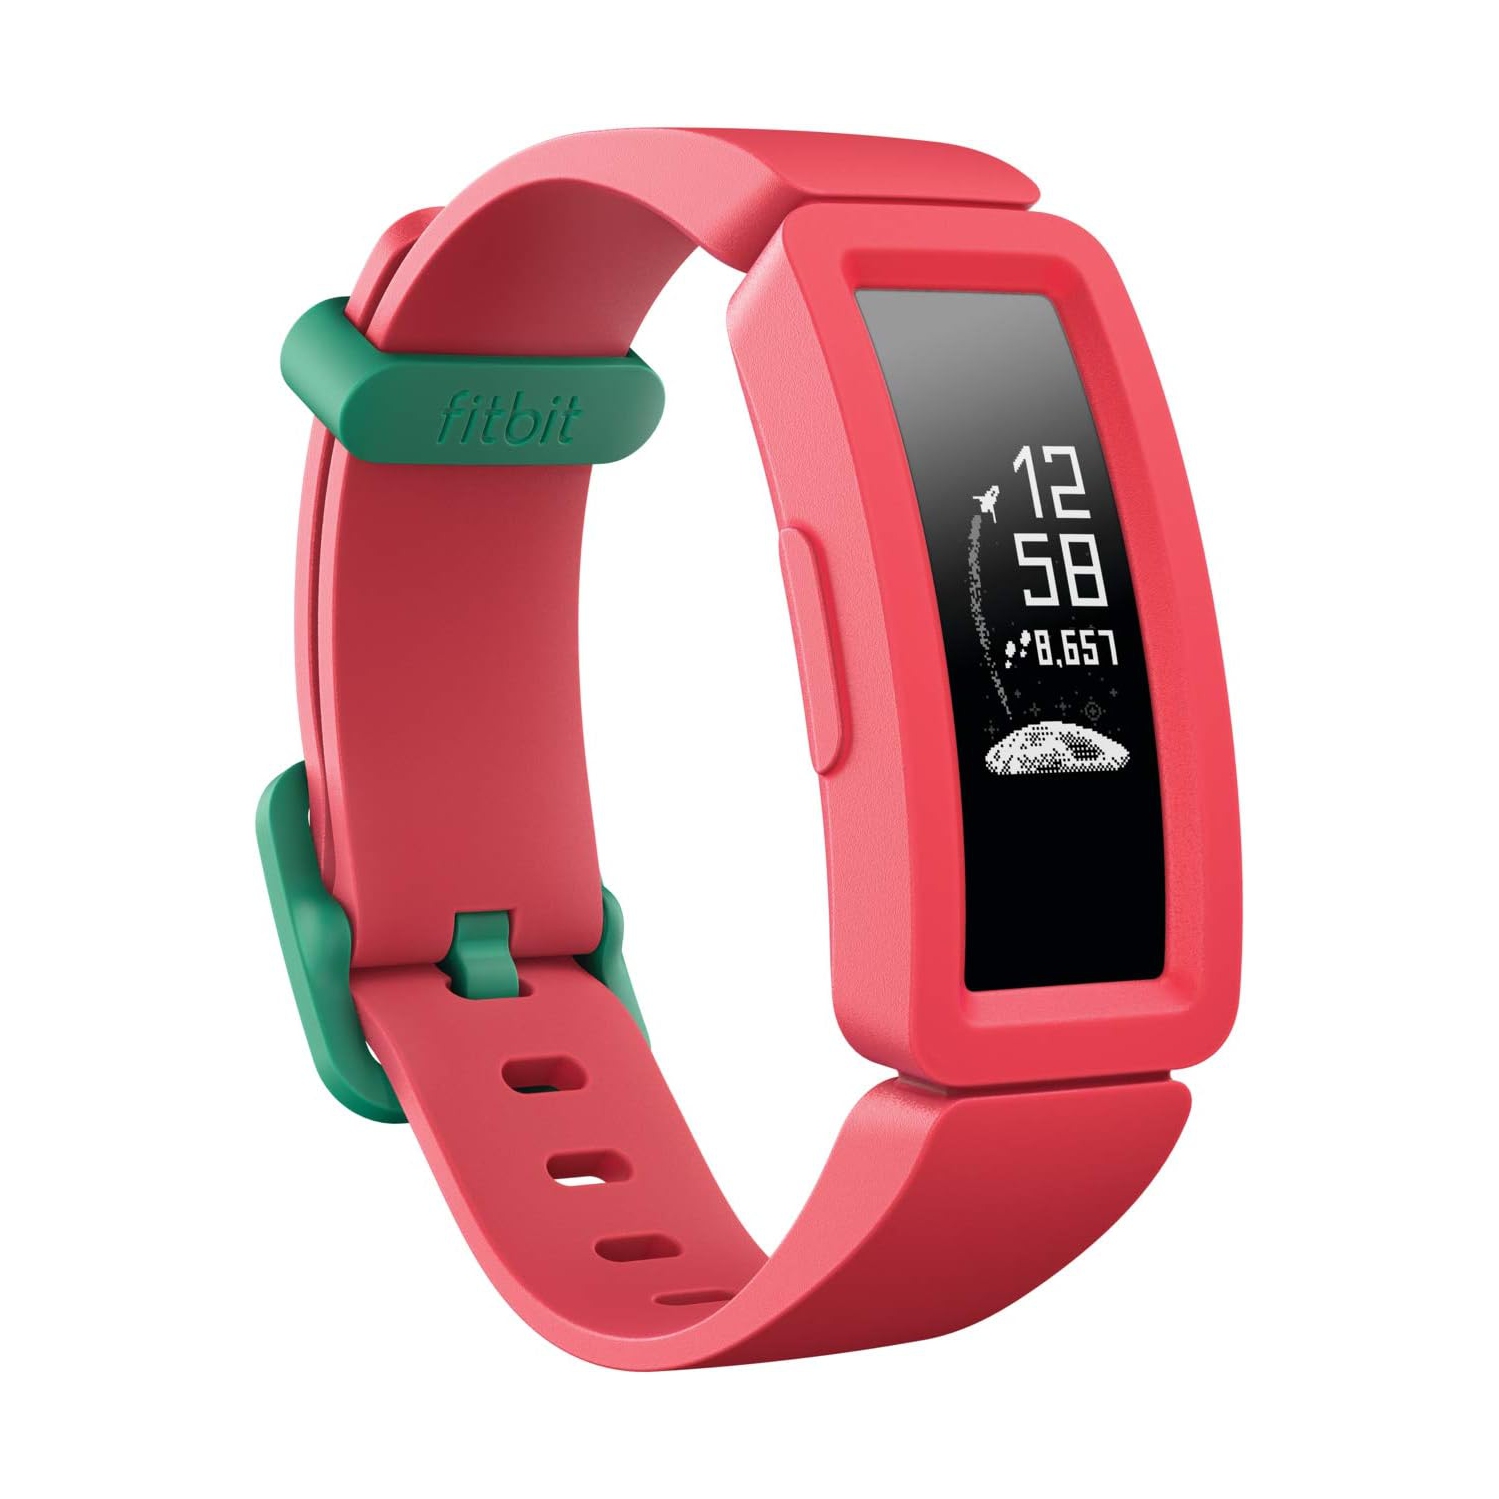 Refurbished (Good)- Fitbit Ace 2 Activity Tracker for Kids, Watermelon/Teal